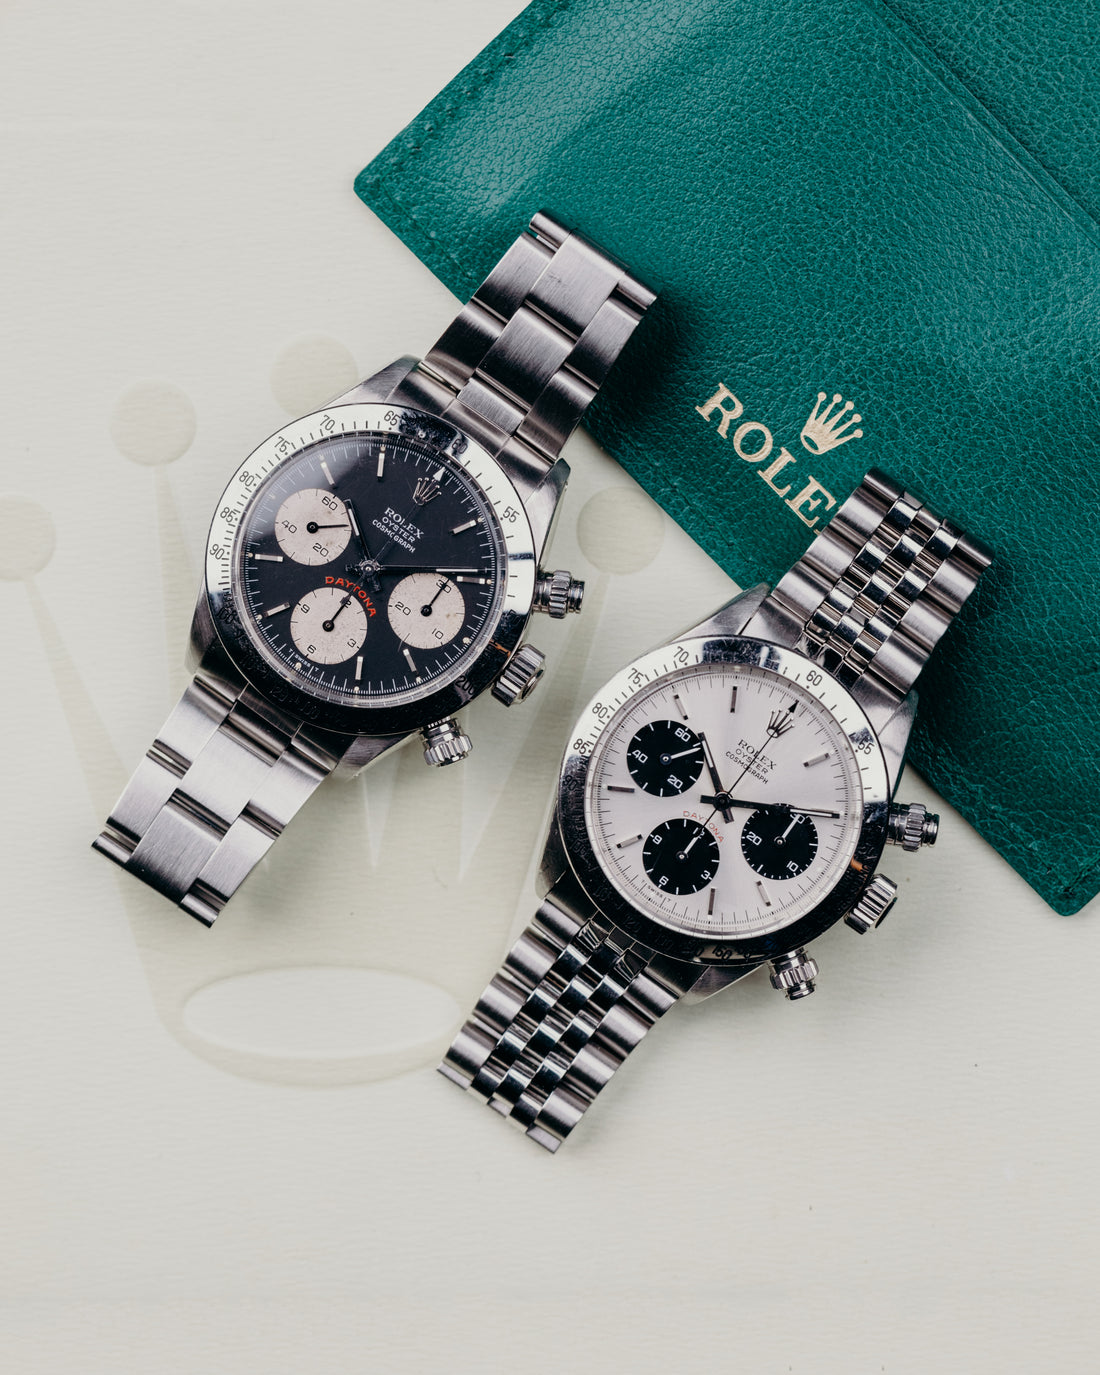 Paul Newman’s Rolex Daytona - The Story of an Icon